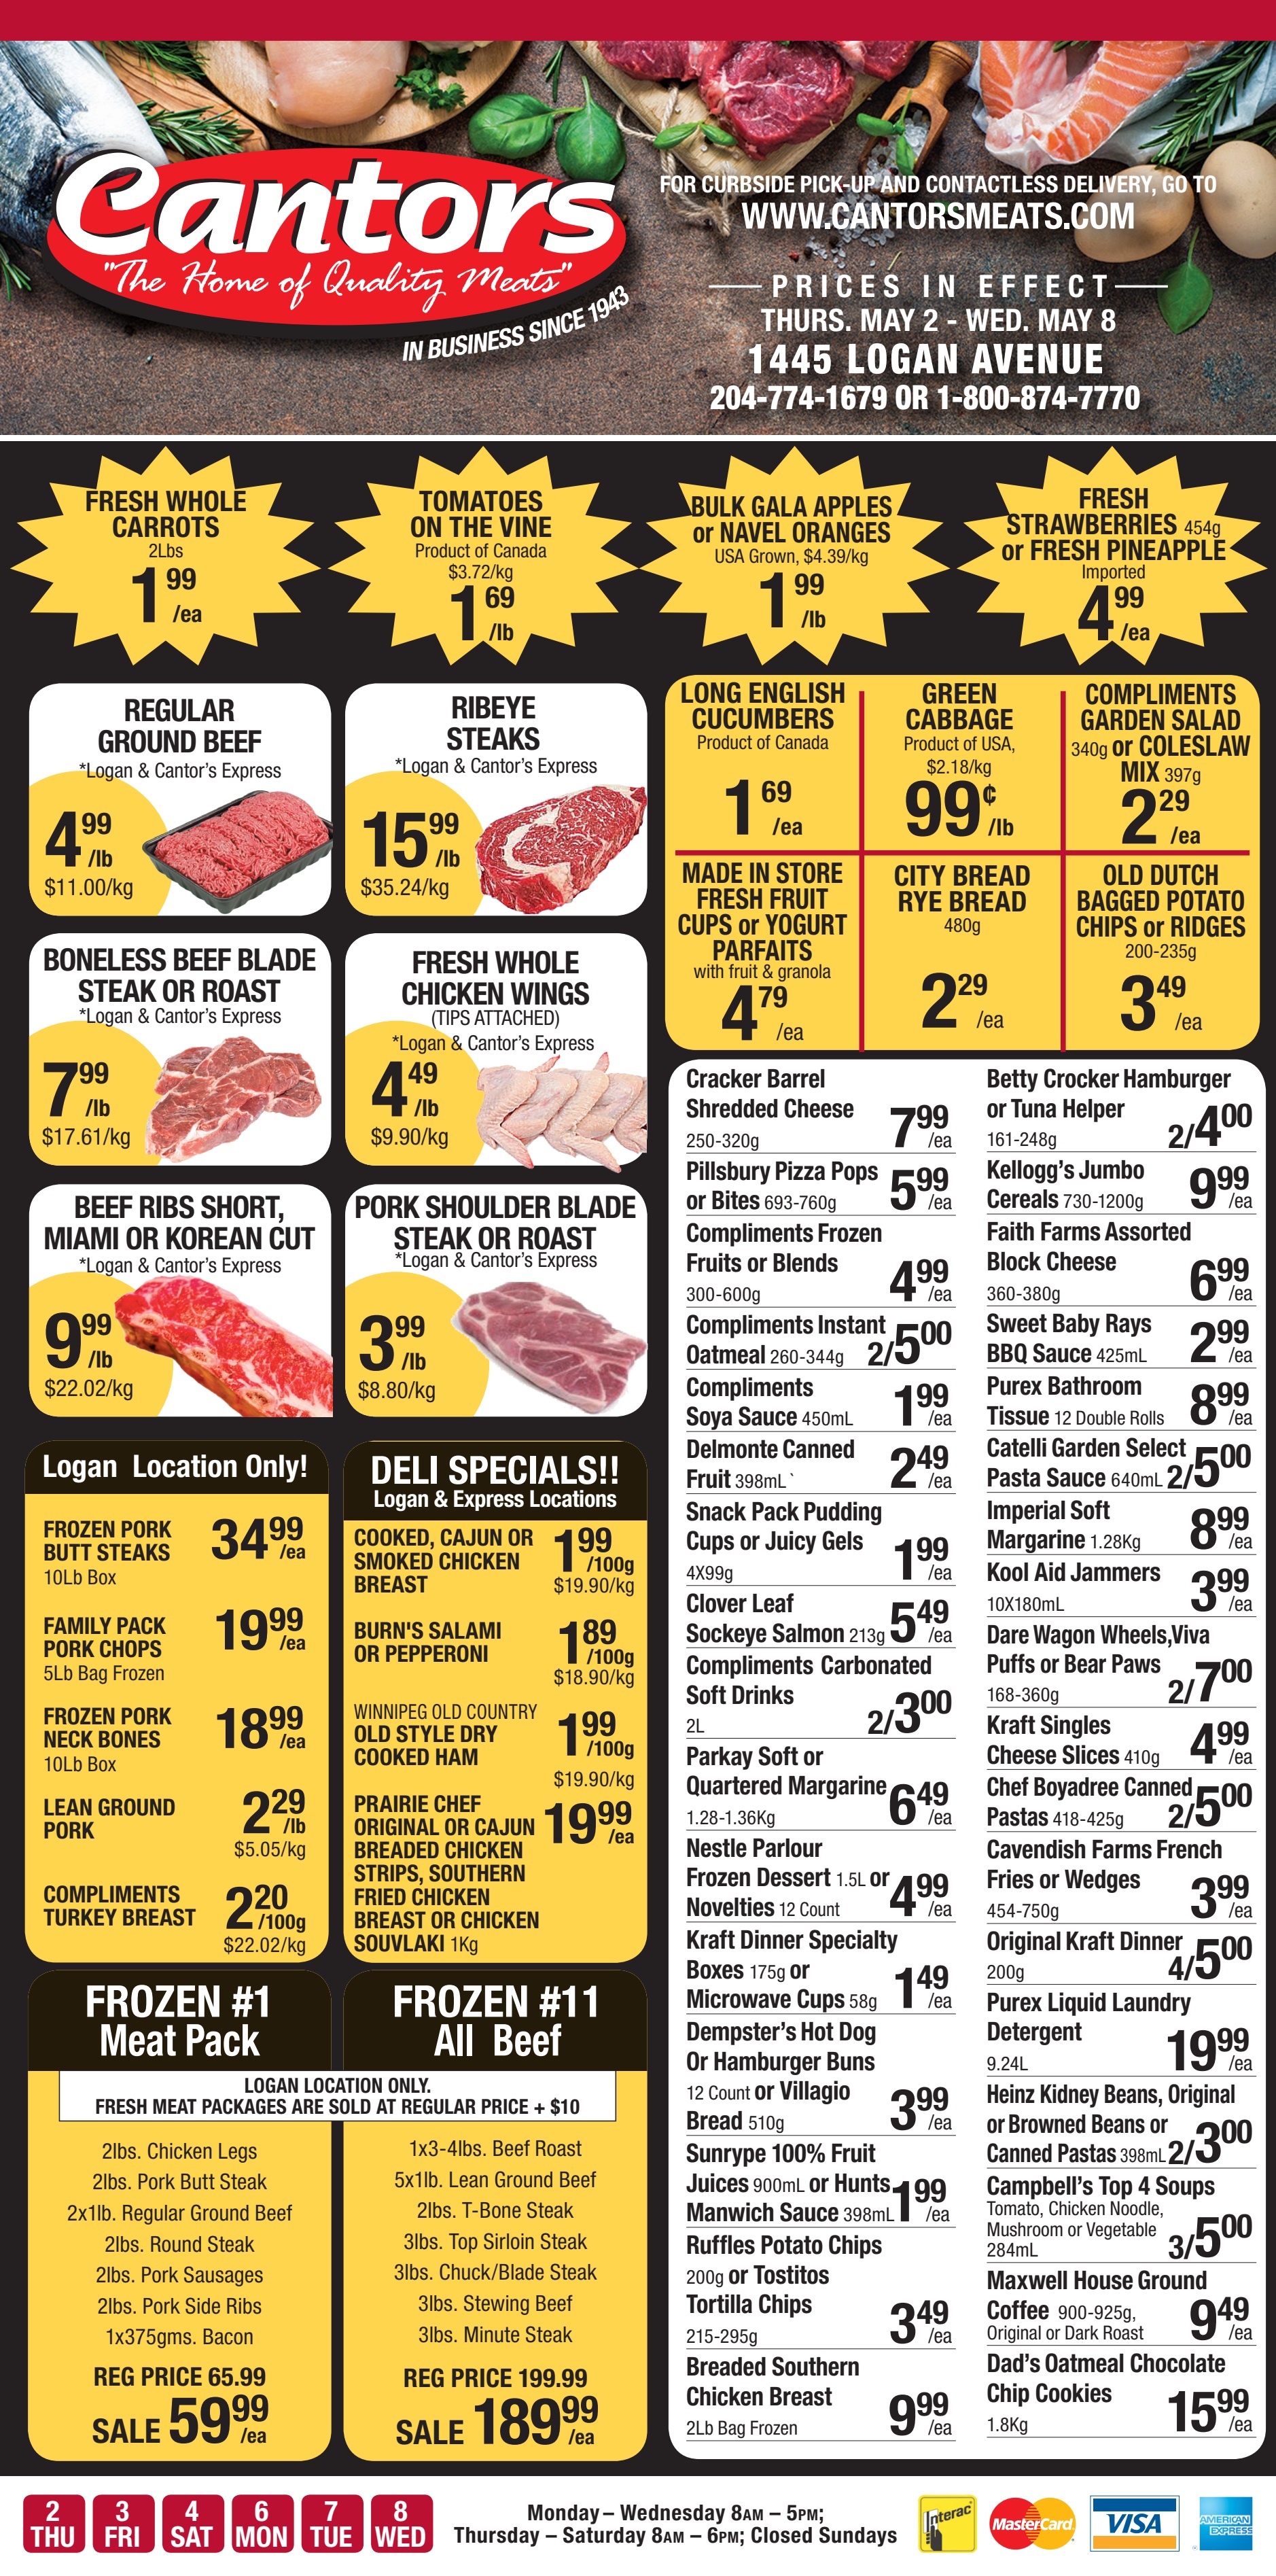 Cantor's Quality Meats & Groceries - Weekly Flyer Specials